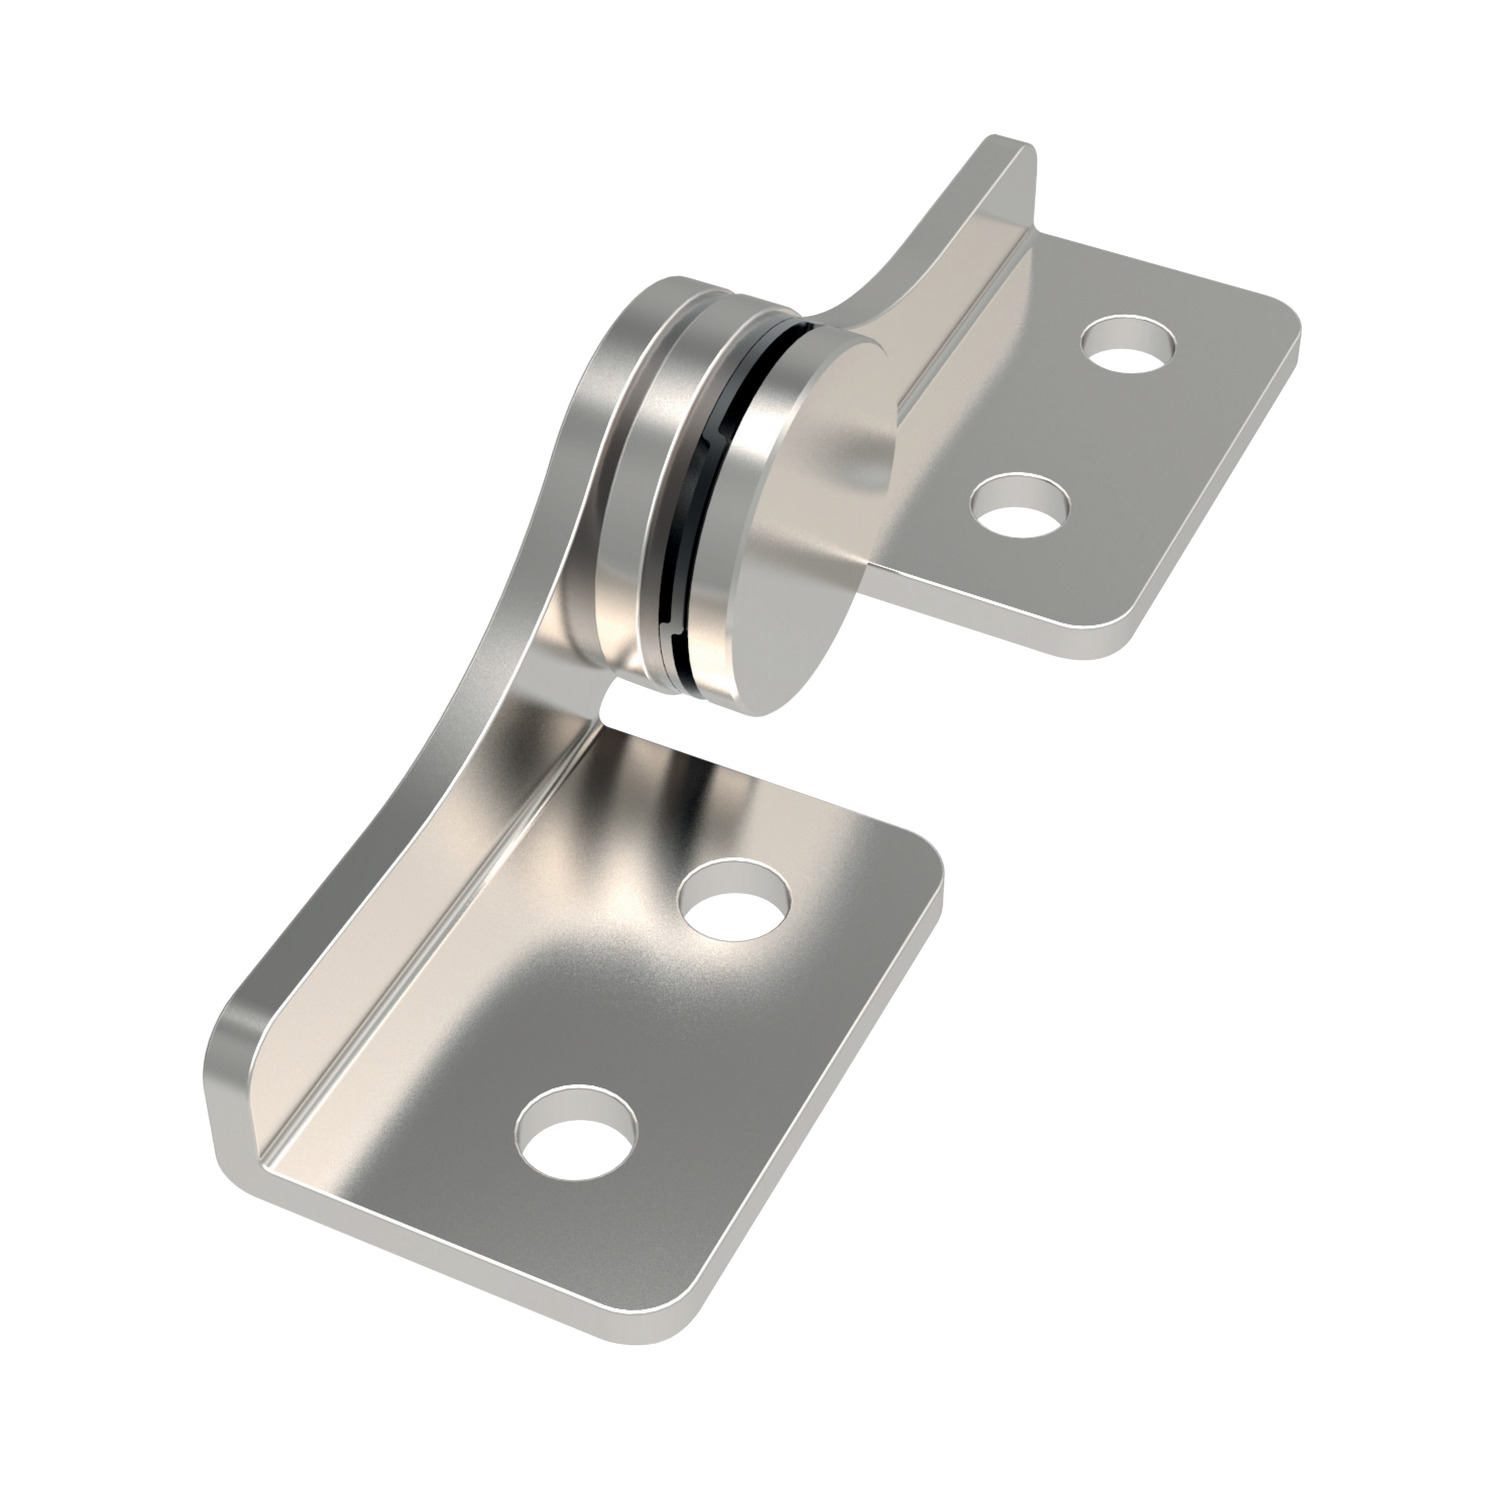 Constant Torque - Friction Hinges Stainless steel constant torque friction hinges ideal for monitoring cameras, screen and other displays. Constant toque applies through free stop angle.